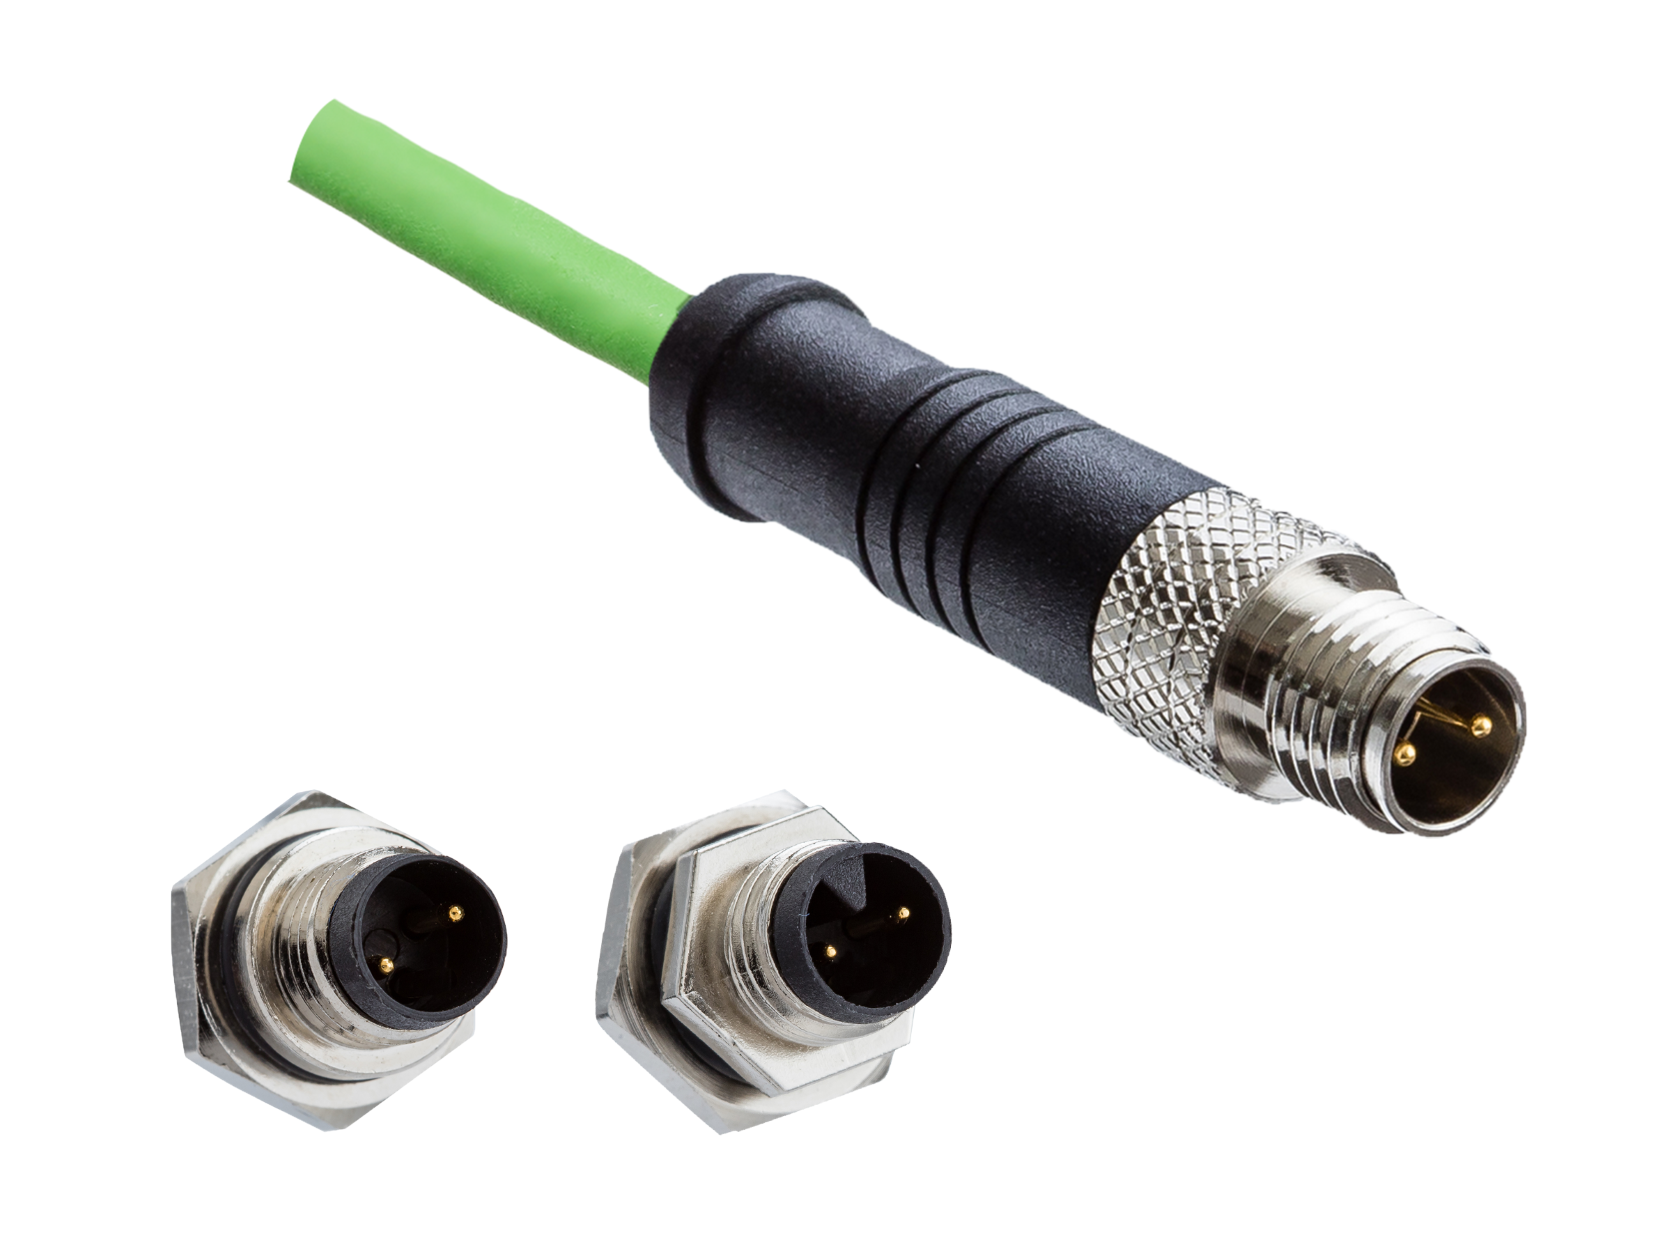 TTI Europe Now Stocks Amphenol's IP67 M8 Single Pair Ethernet Connections